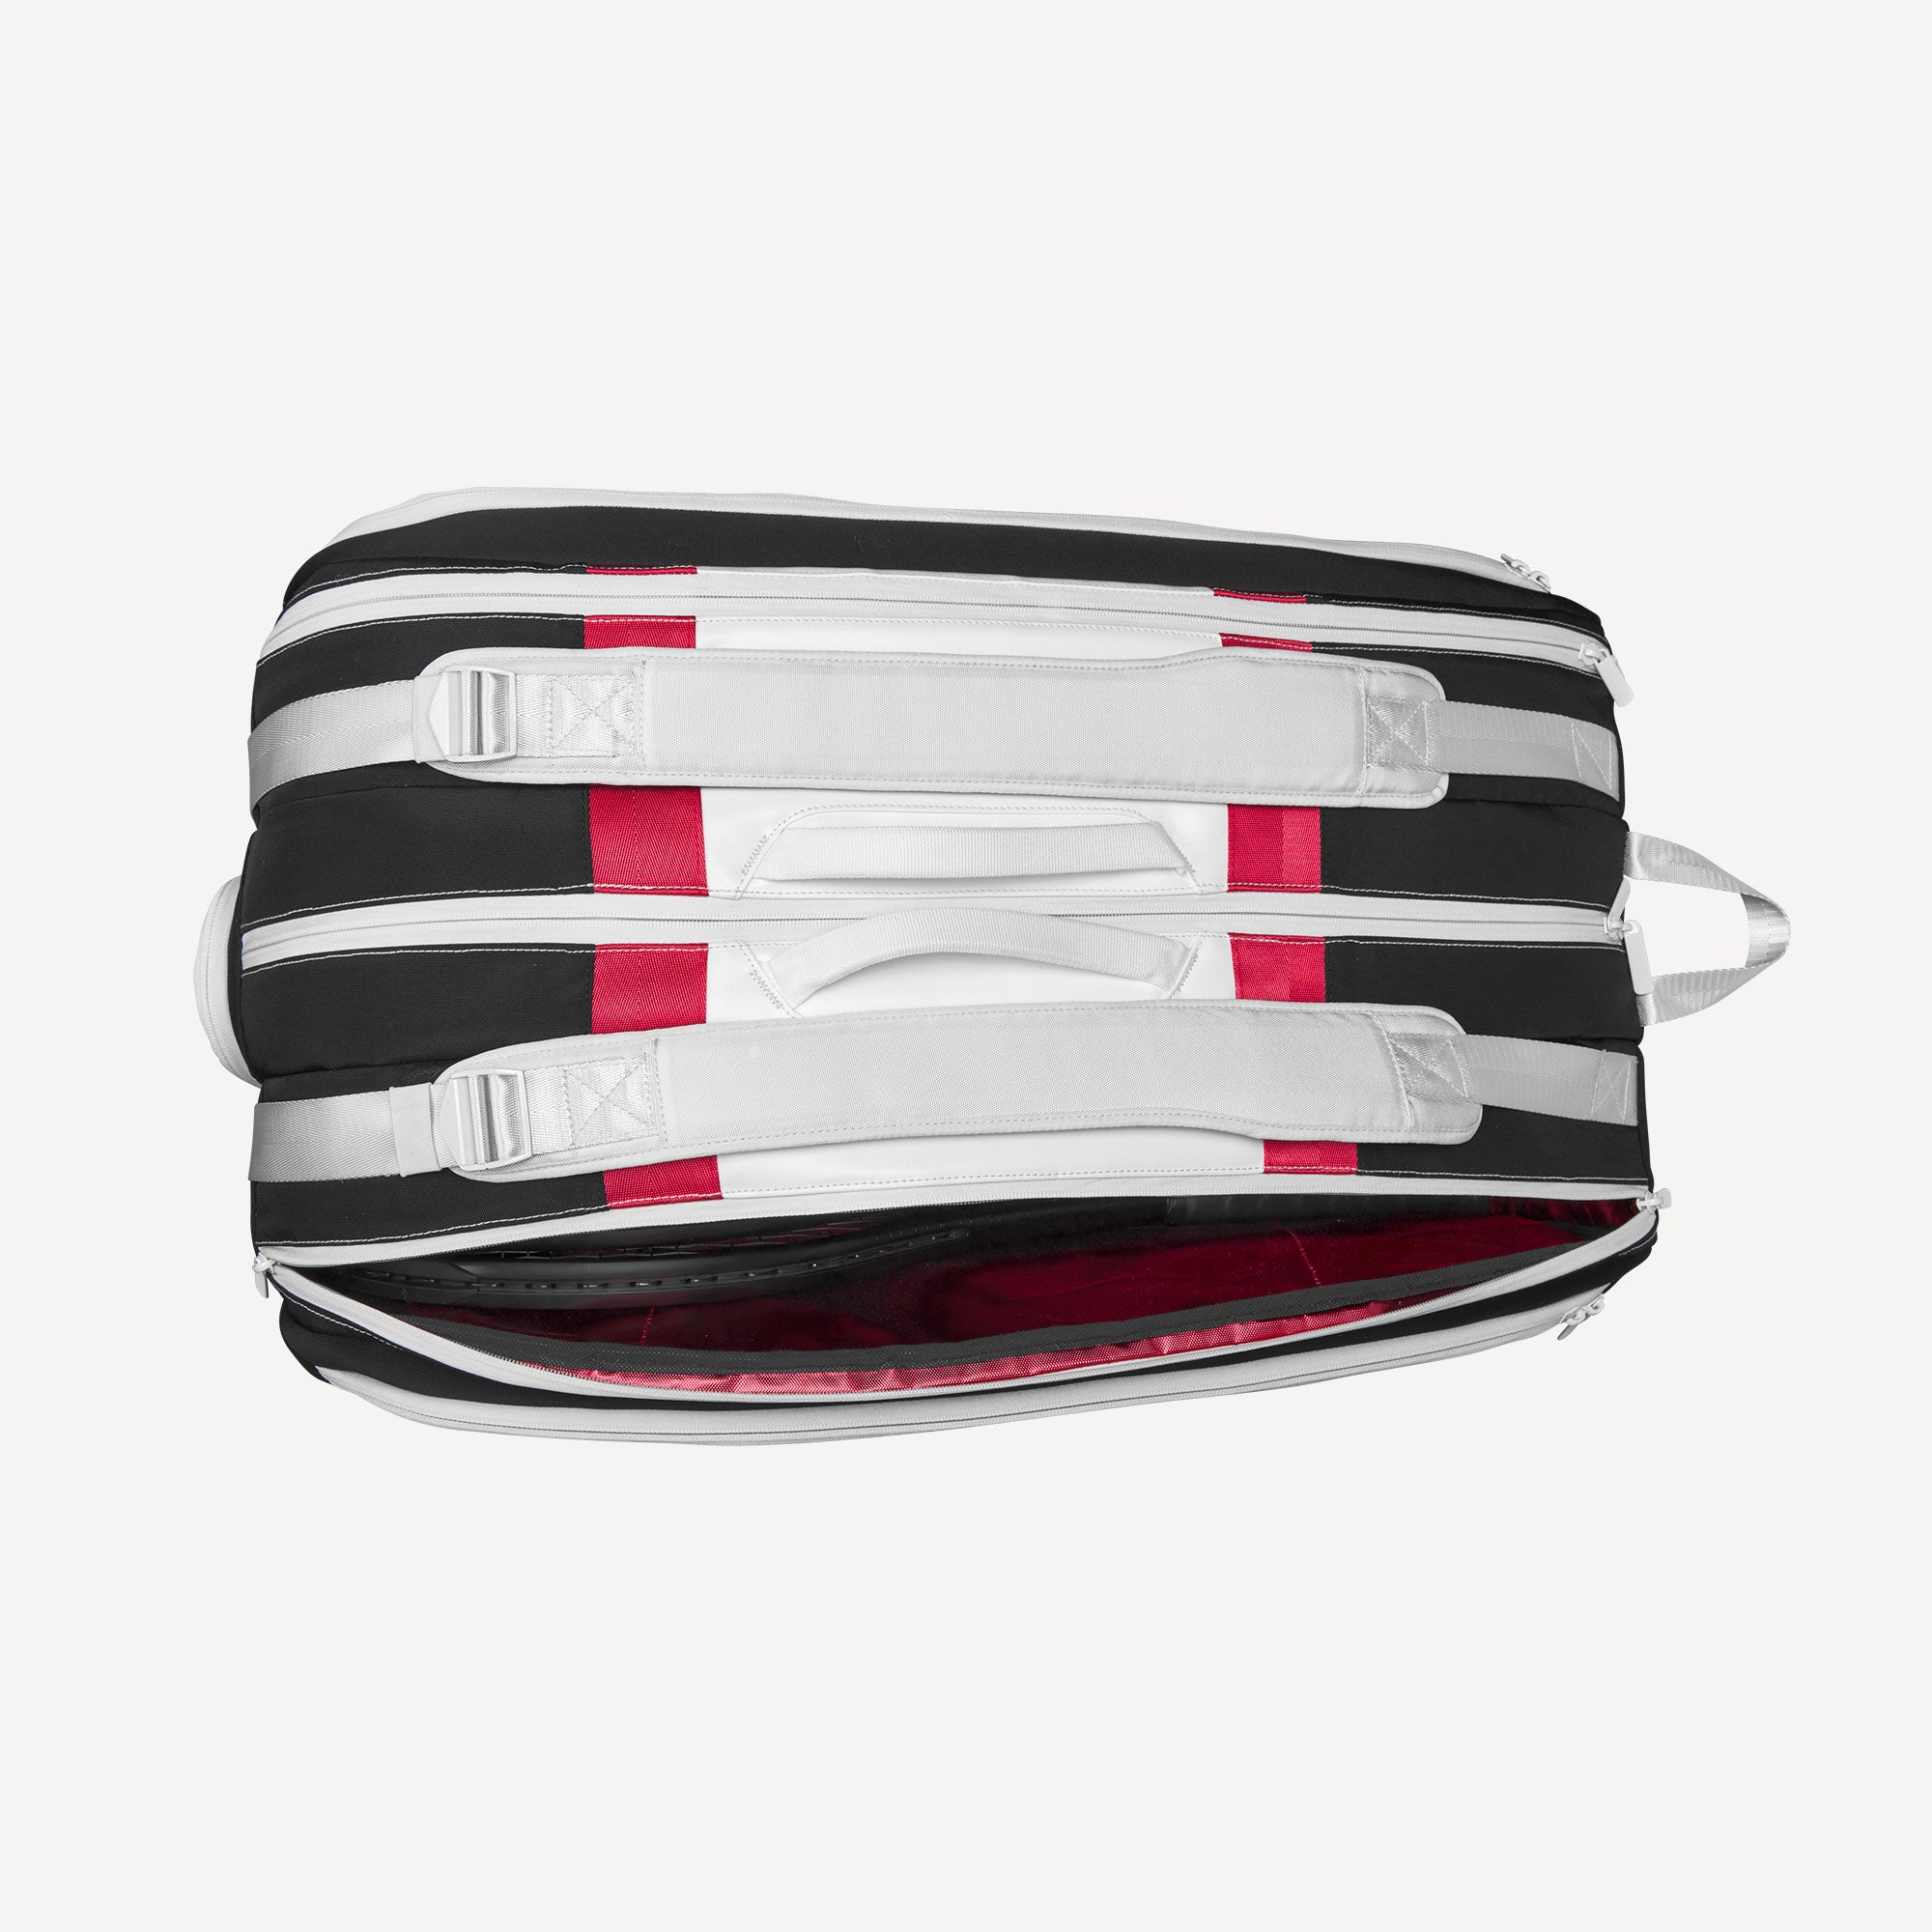 Wilson Courage Collection 15 Racket Tennis Bag - Black/White/Red (9)